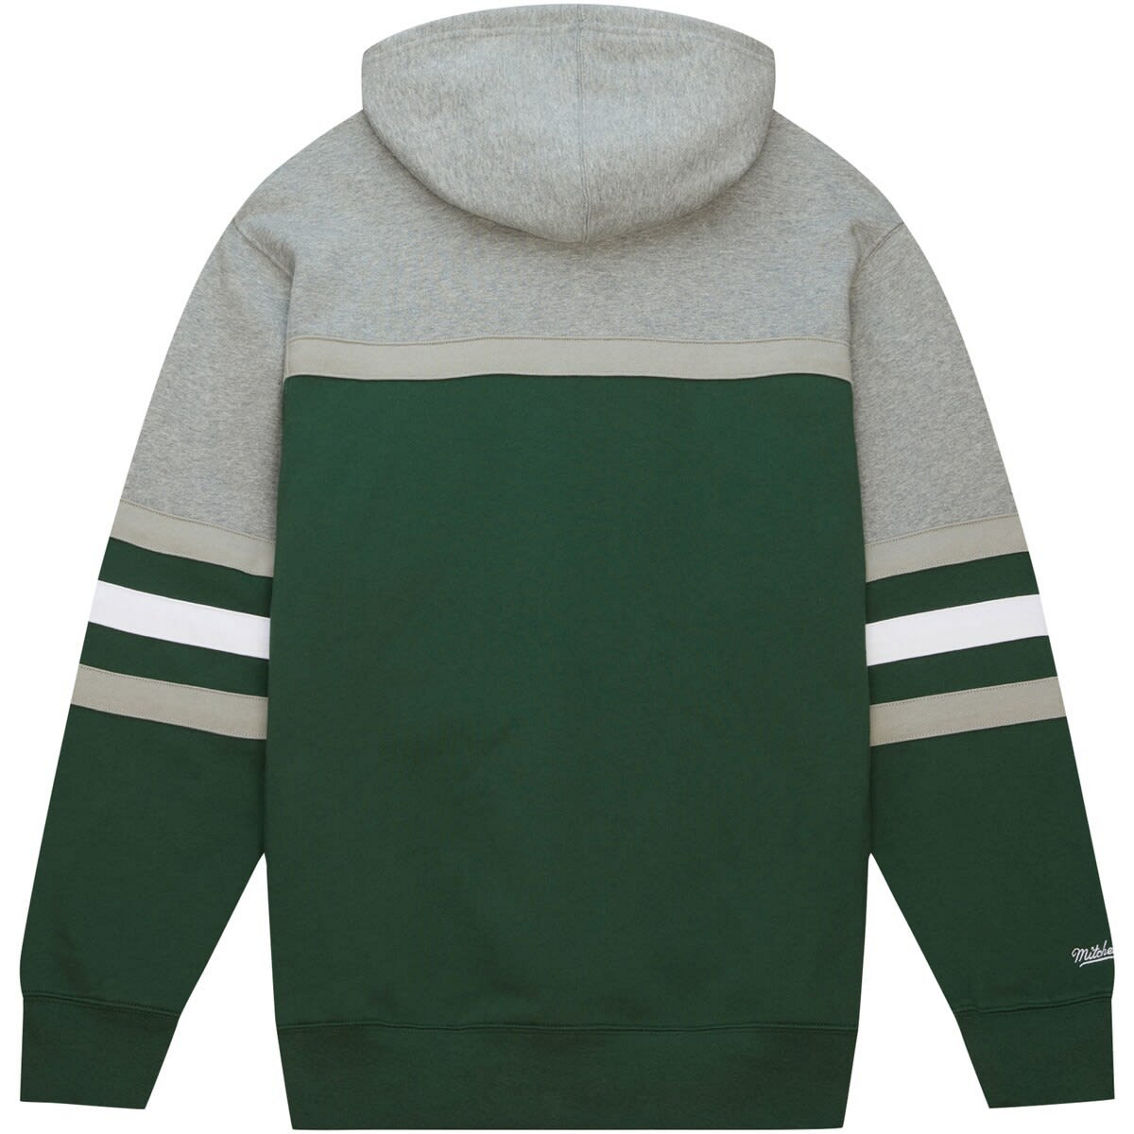 Mitchell & Ness Men's Green Michigan State Spartans Head Coach Pullover Hoodie - Image 4 of 4